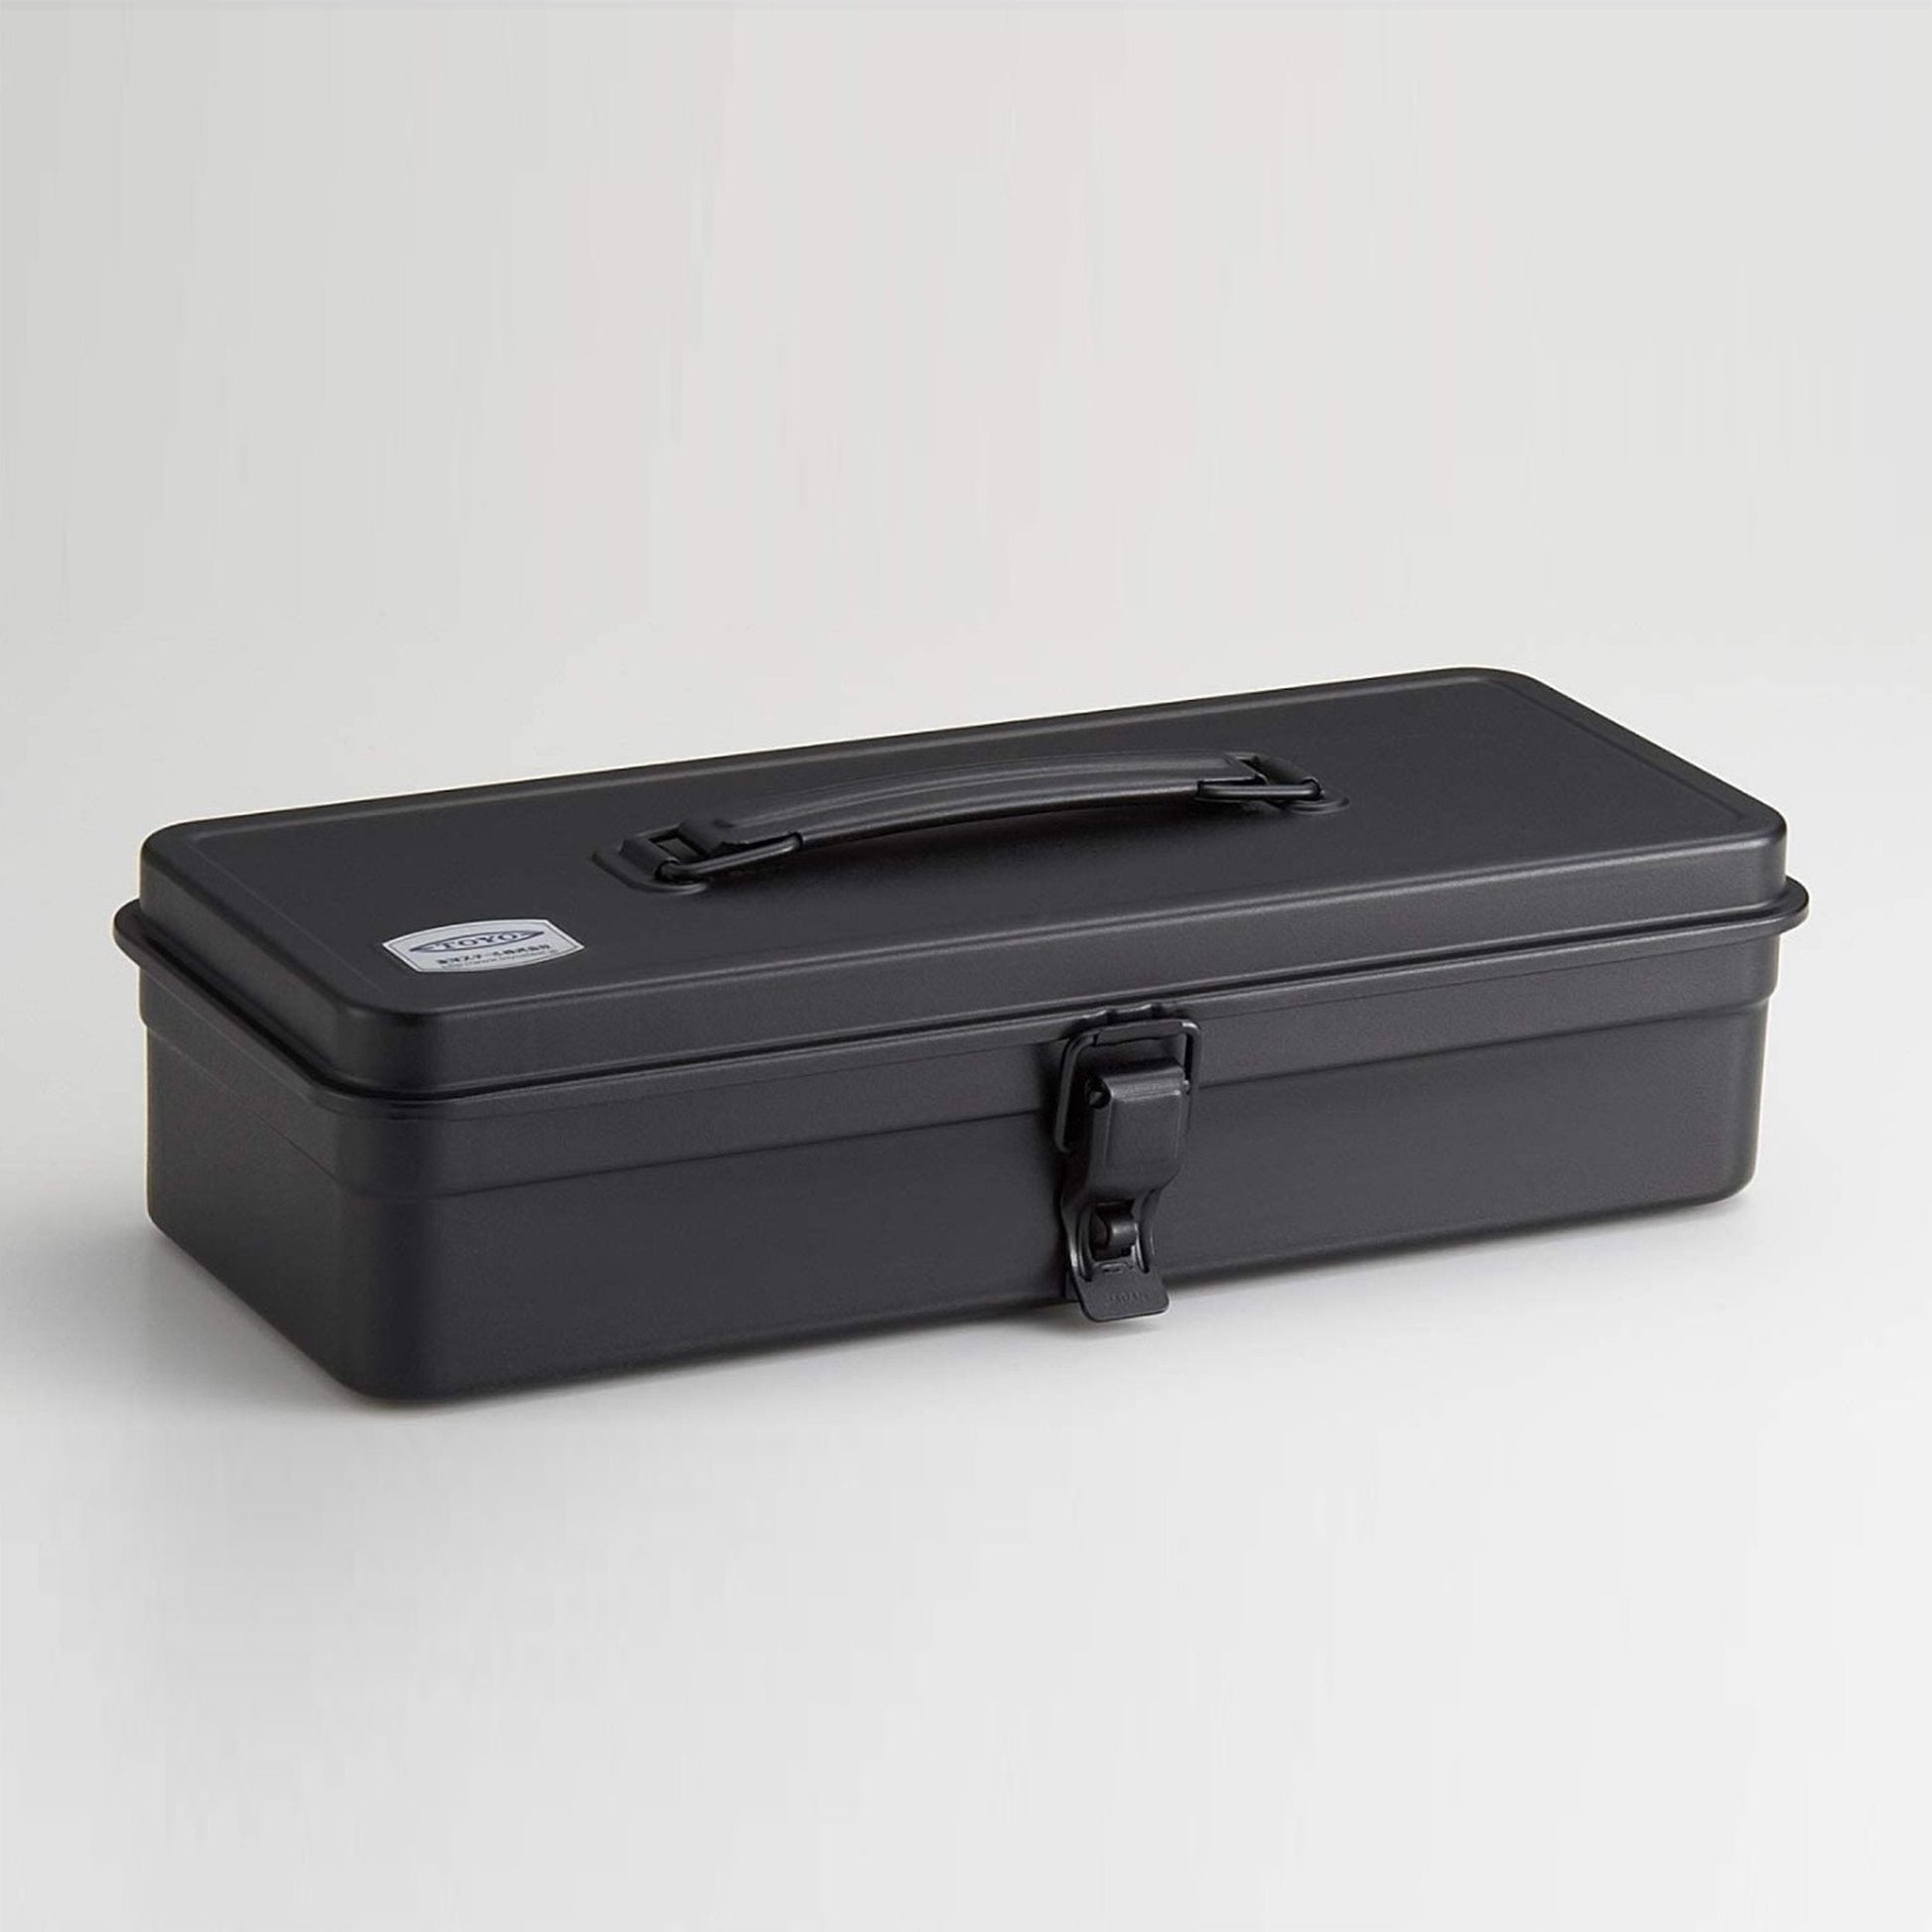 Steel Toolbox with Top Handle and Flat Lid, style T-320